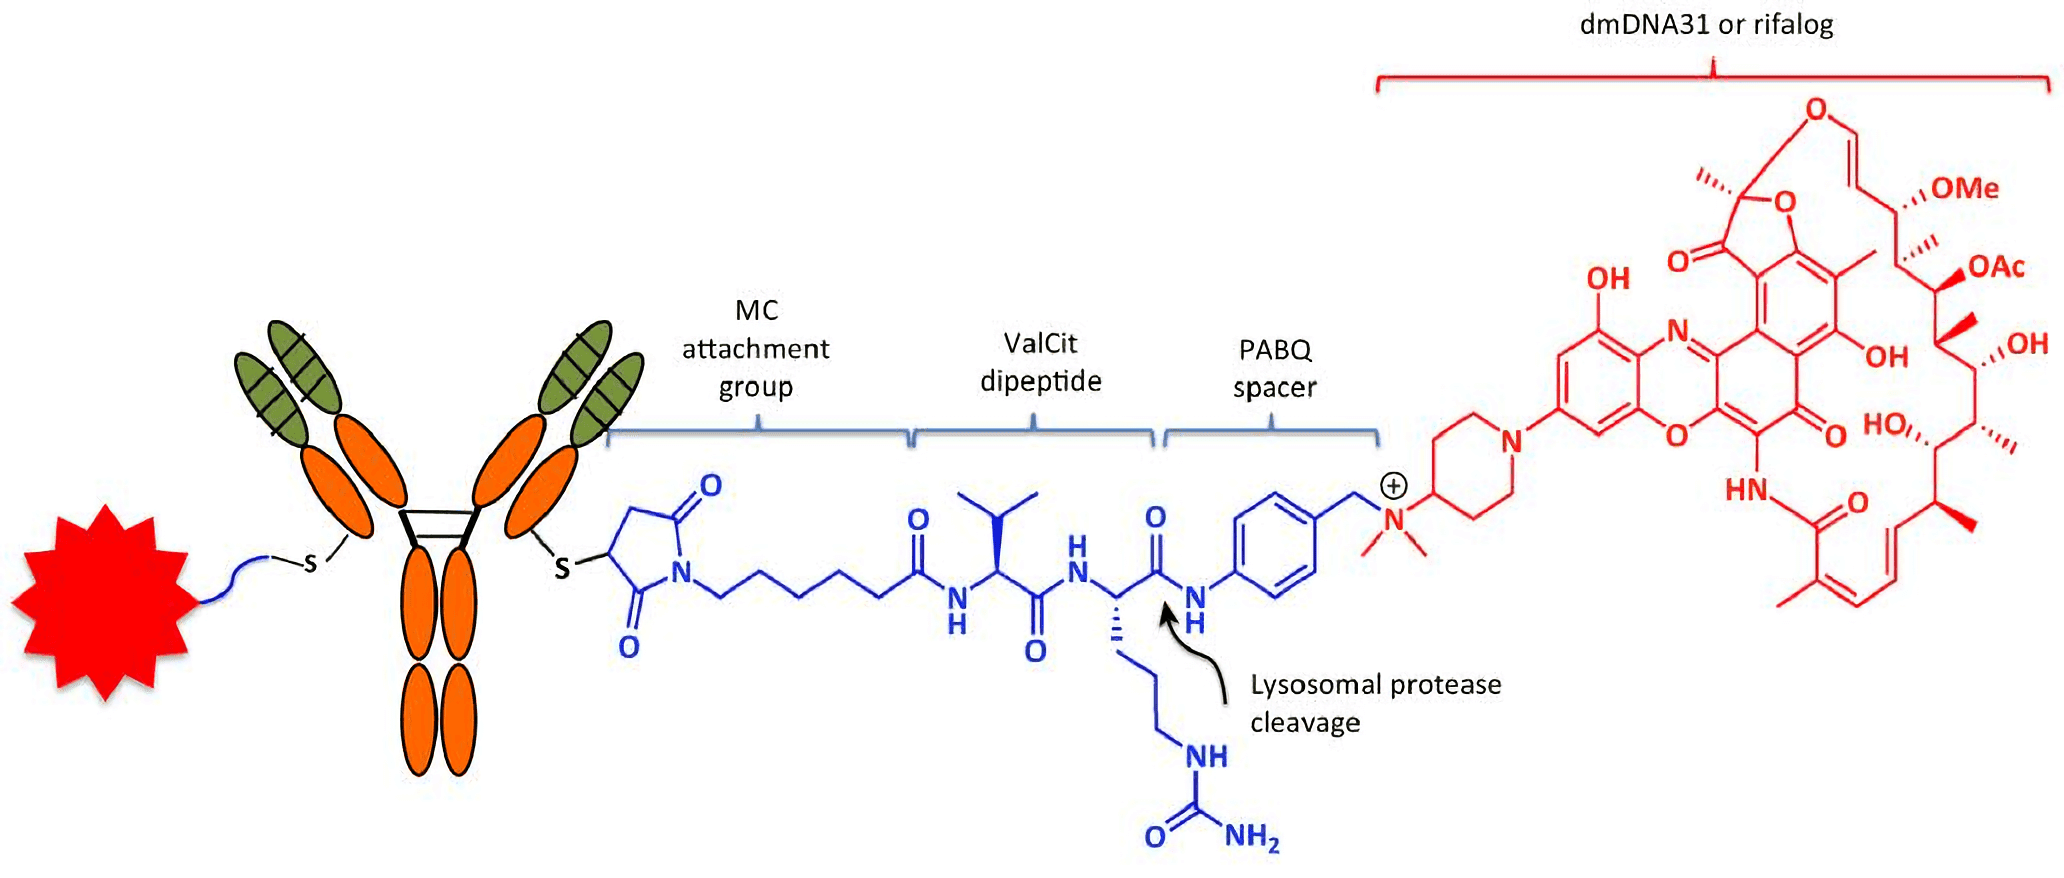 Anatomy of the Antibody–Antibiotic Conjugate (AAC). Each anti-S. aureus AAC consists of two molecules: dmDNA31 antibiotics (red) linked to each of the light chains of the β-GlcNAc-WTA monoclonal antibody (mAb) via an MC-ValCit-PABQ linker (blue; the red star on the left of the AAC is another linker-drug moiety). Attachment to the mAb is achieved through covalent linkage between the reactive thiol in the engineered cysteine of the antibody and maleimide. The linker–antibiotic attachment is formed between the self-immolation p-aminobenzyl quaternary ammonium salt (PABQ) and the tertiary amine of dmDNA31. Within acidic intracellular vesicles, lysosomal proteases such as cathepsin B cleave the amide bond (arrowhead) at the C terminus of citrulline to release active dmDNA31 following the self-immolation of PABQ.